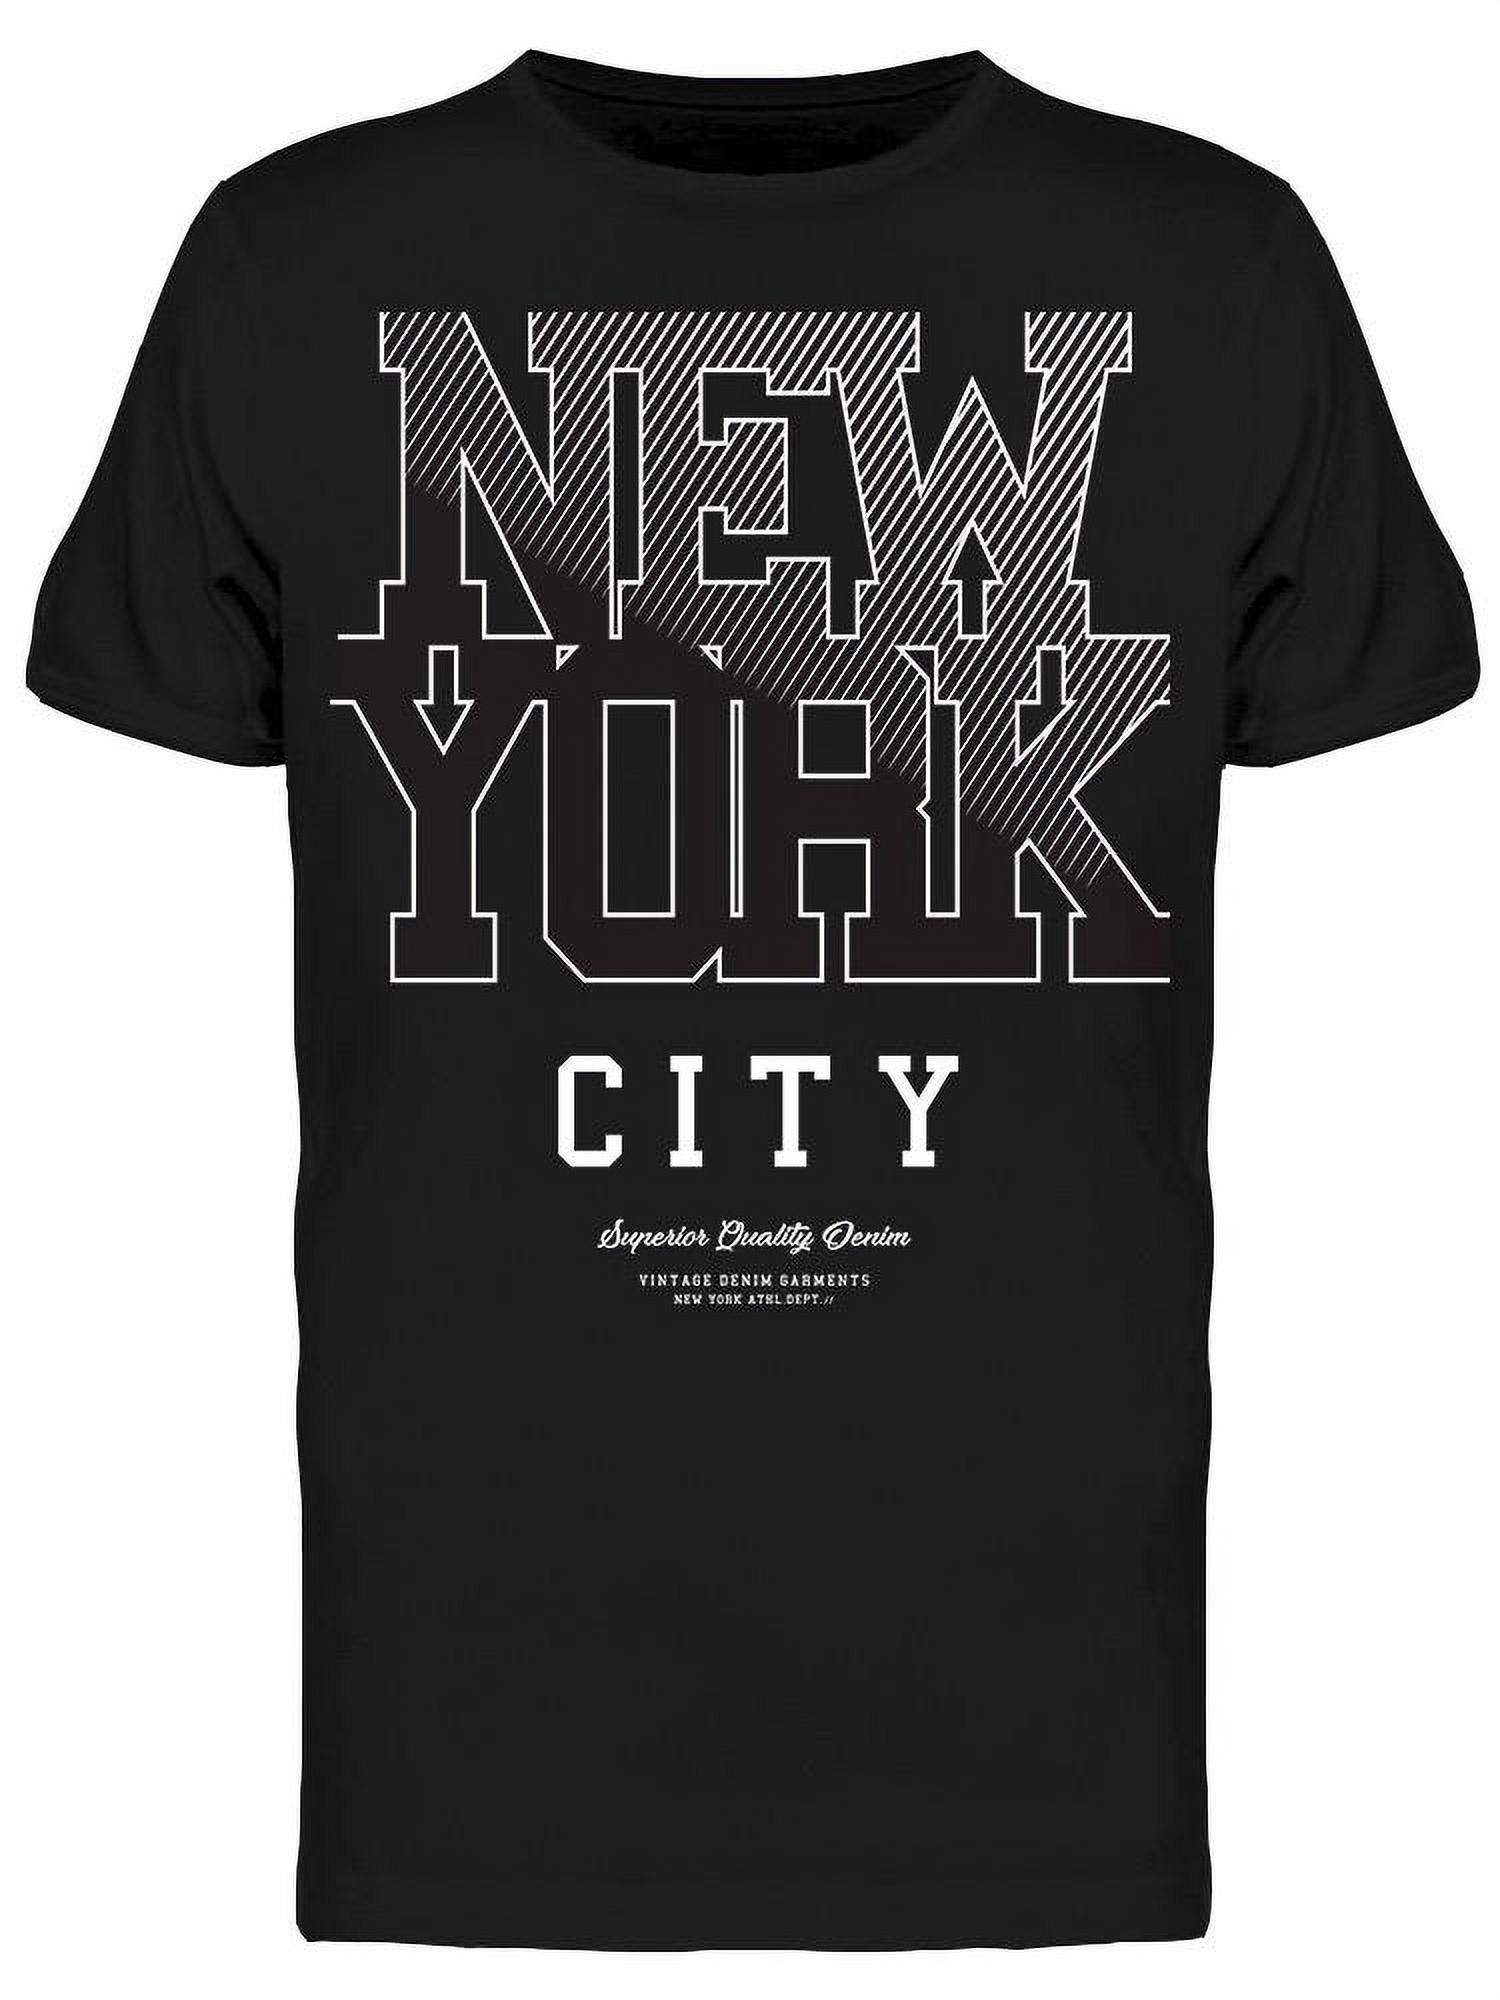 City Lettering  T-Shirt Men -Image by Shutterstock, Male x-Large - image 1 of 2